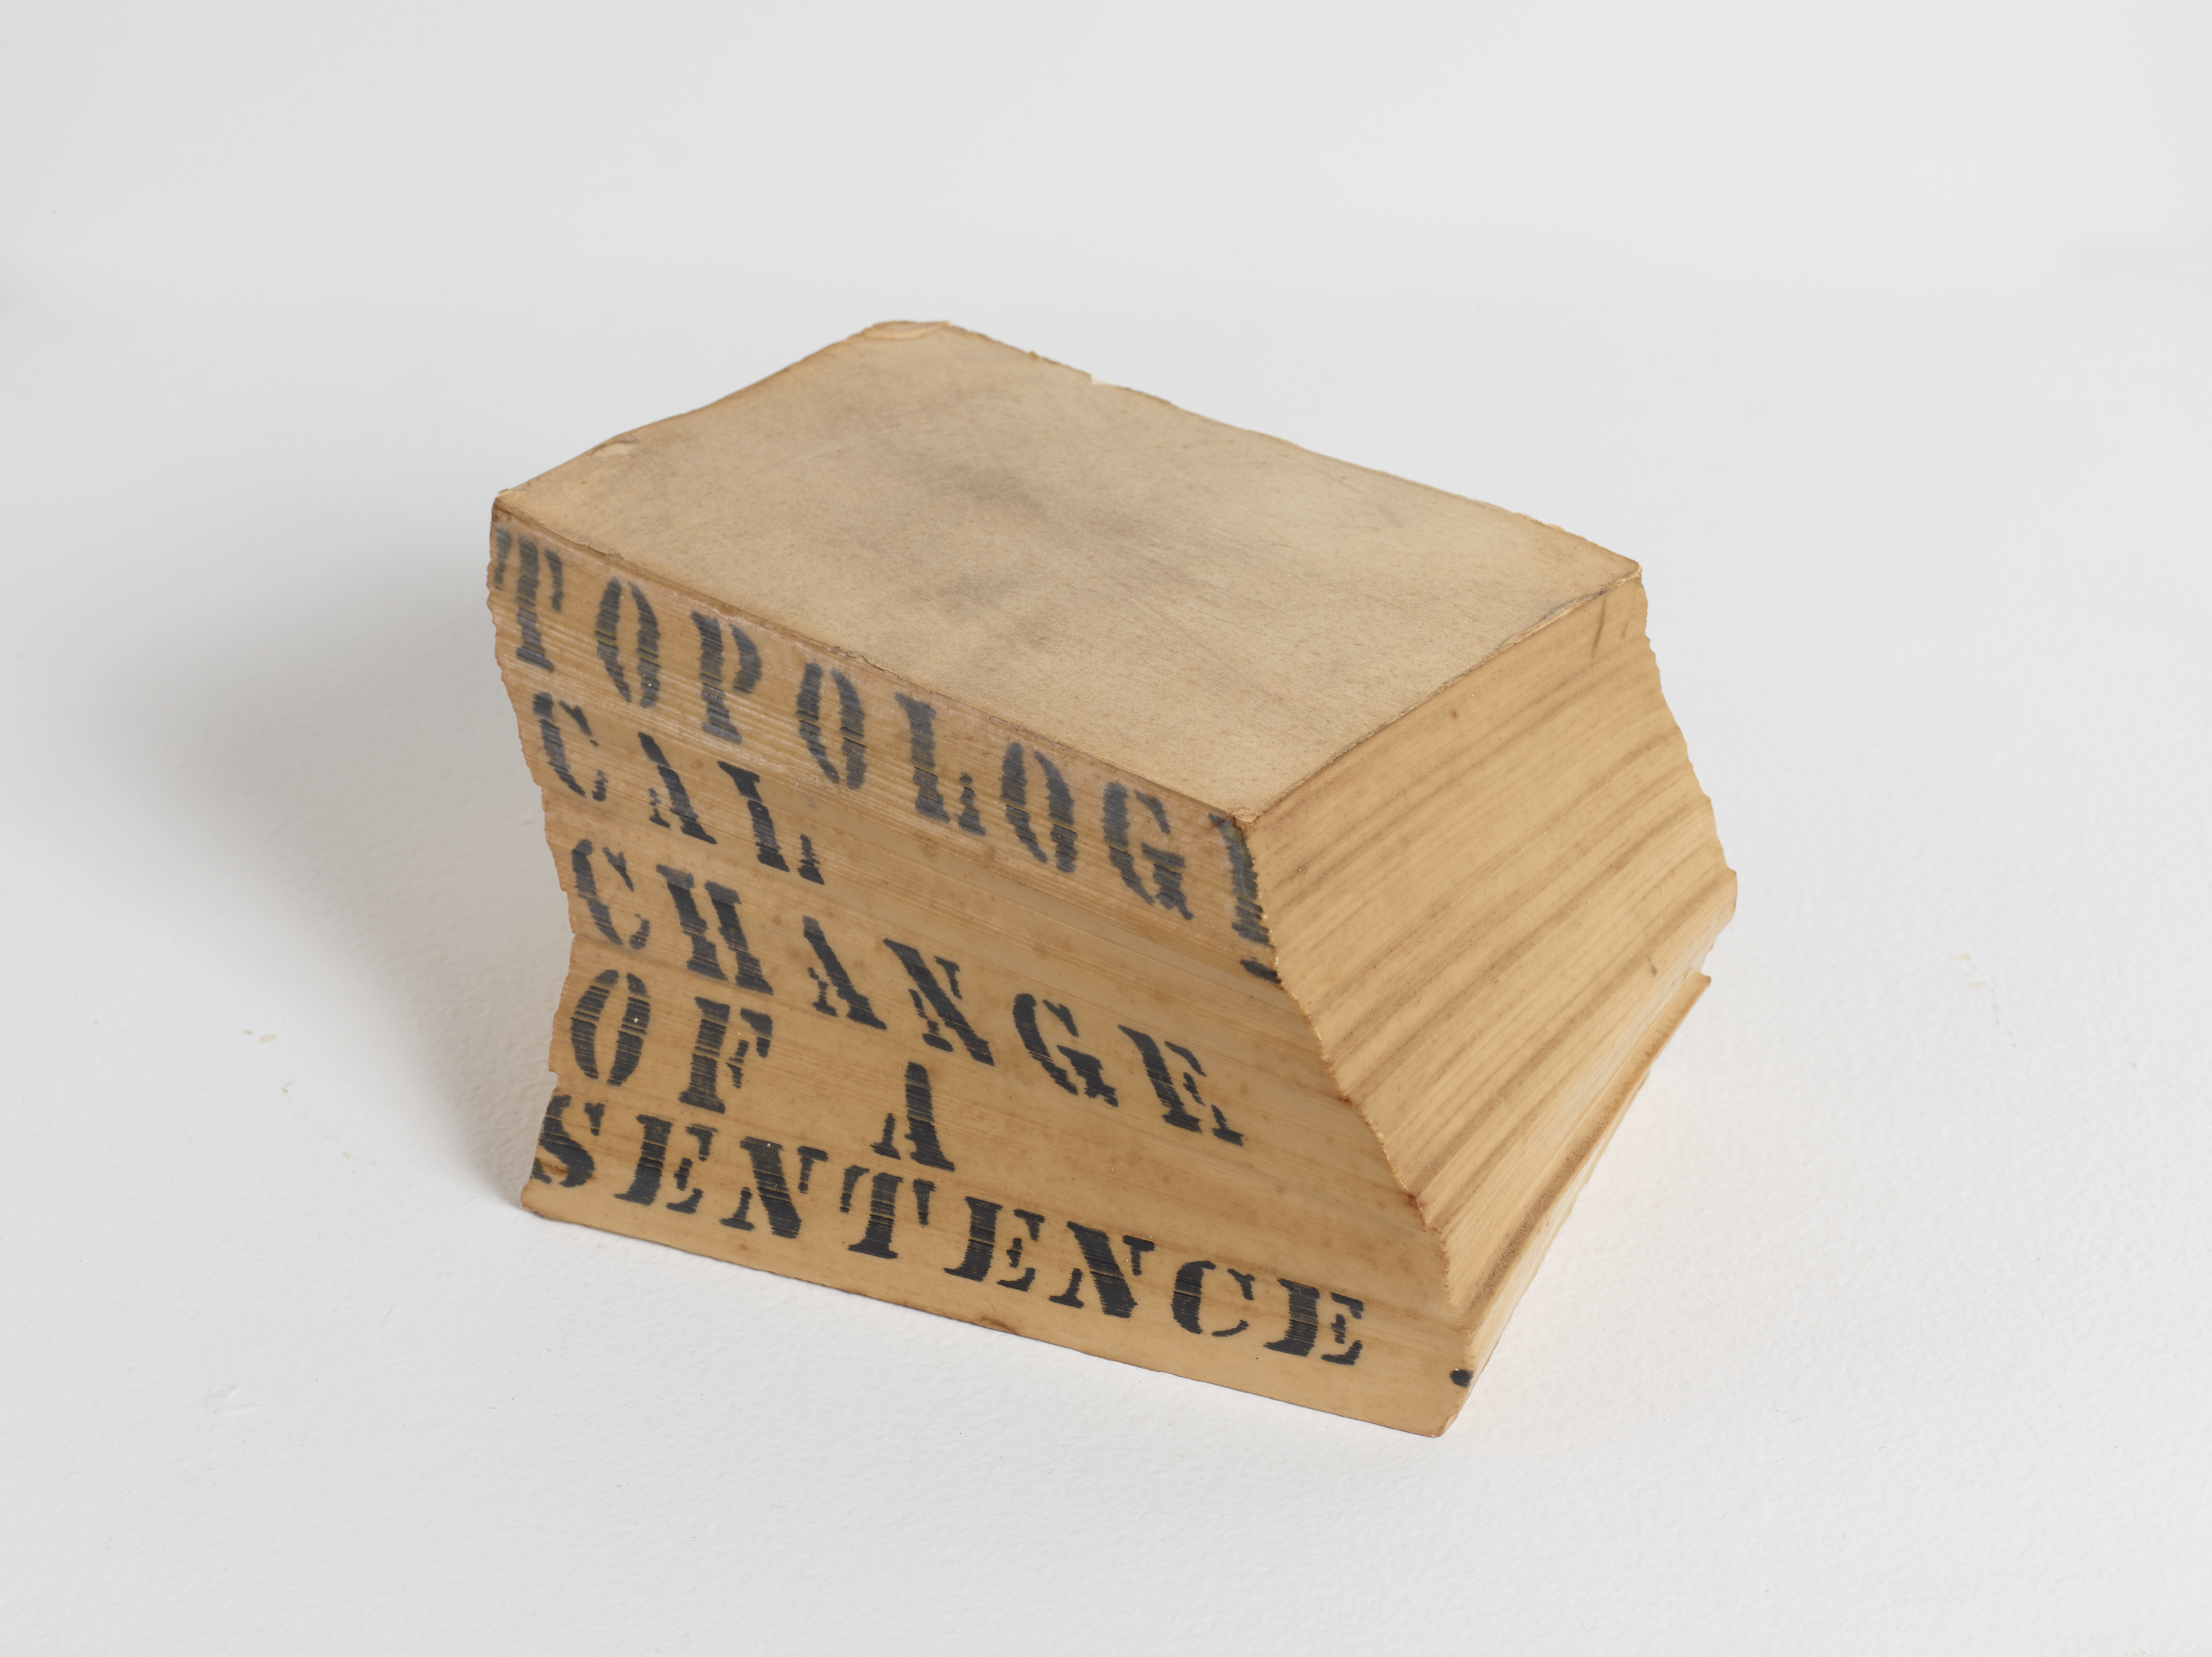 Luis Camnitzer, Topological Change of a Sentence, 1966